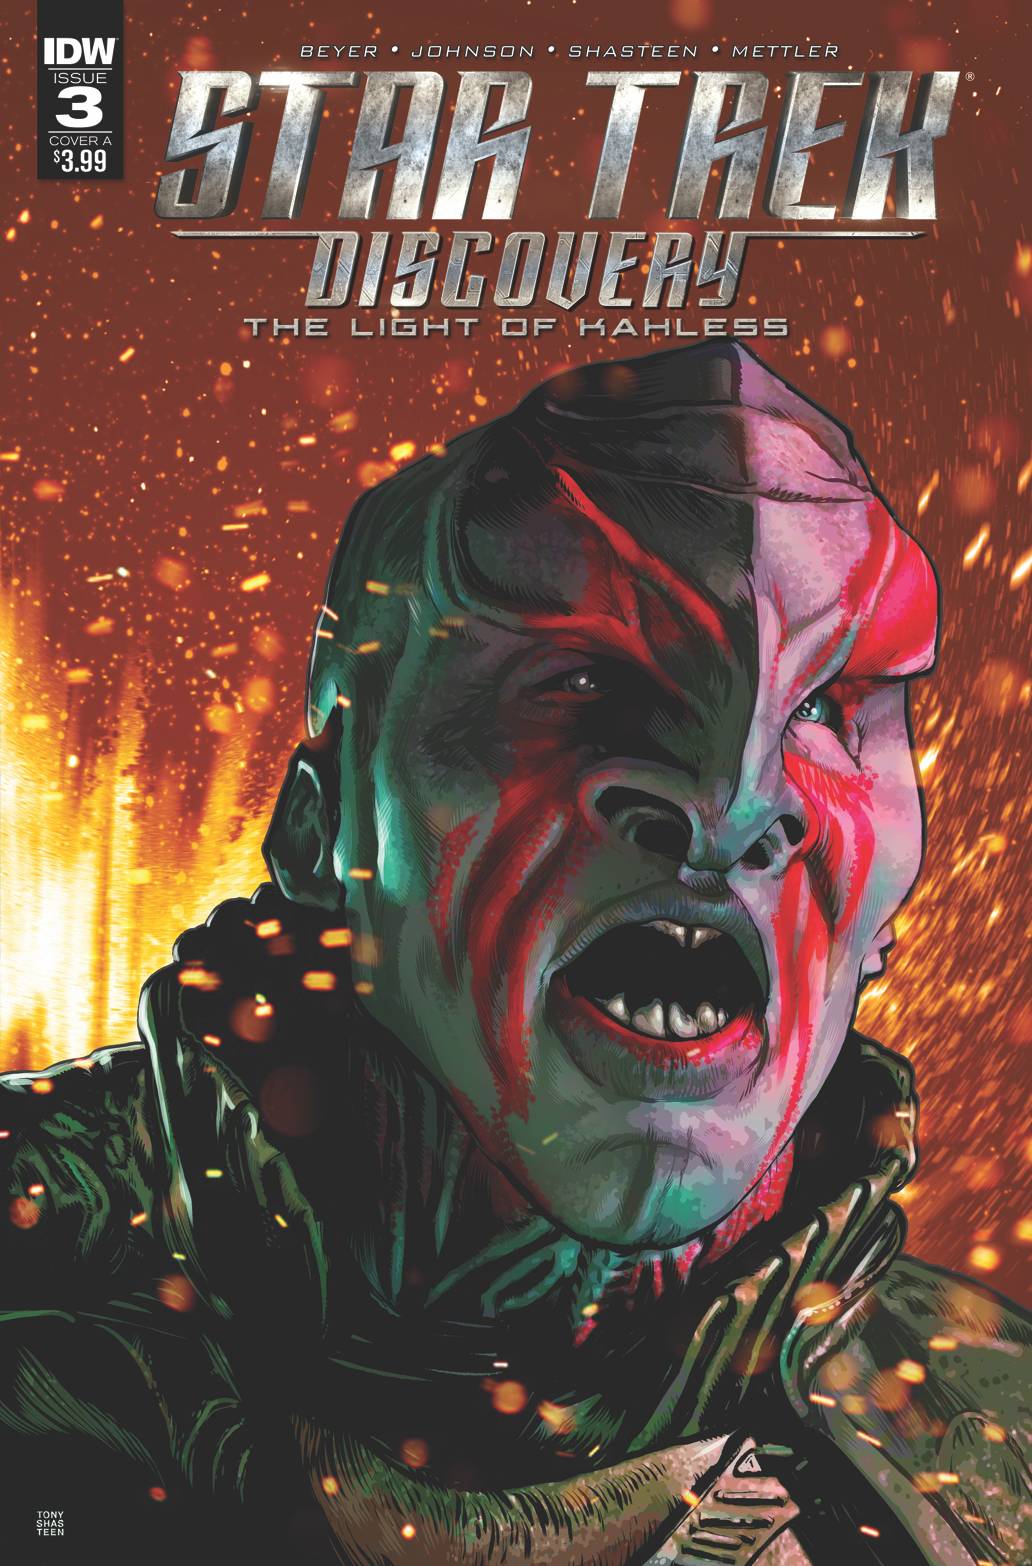 Star Trek Discovery #3 Cover A Shasteen